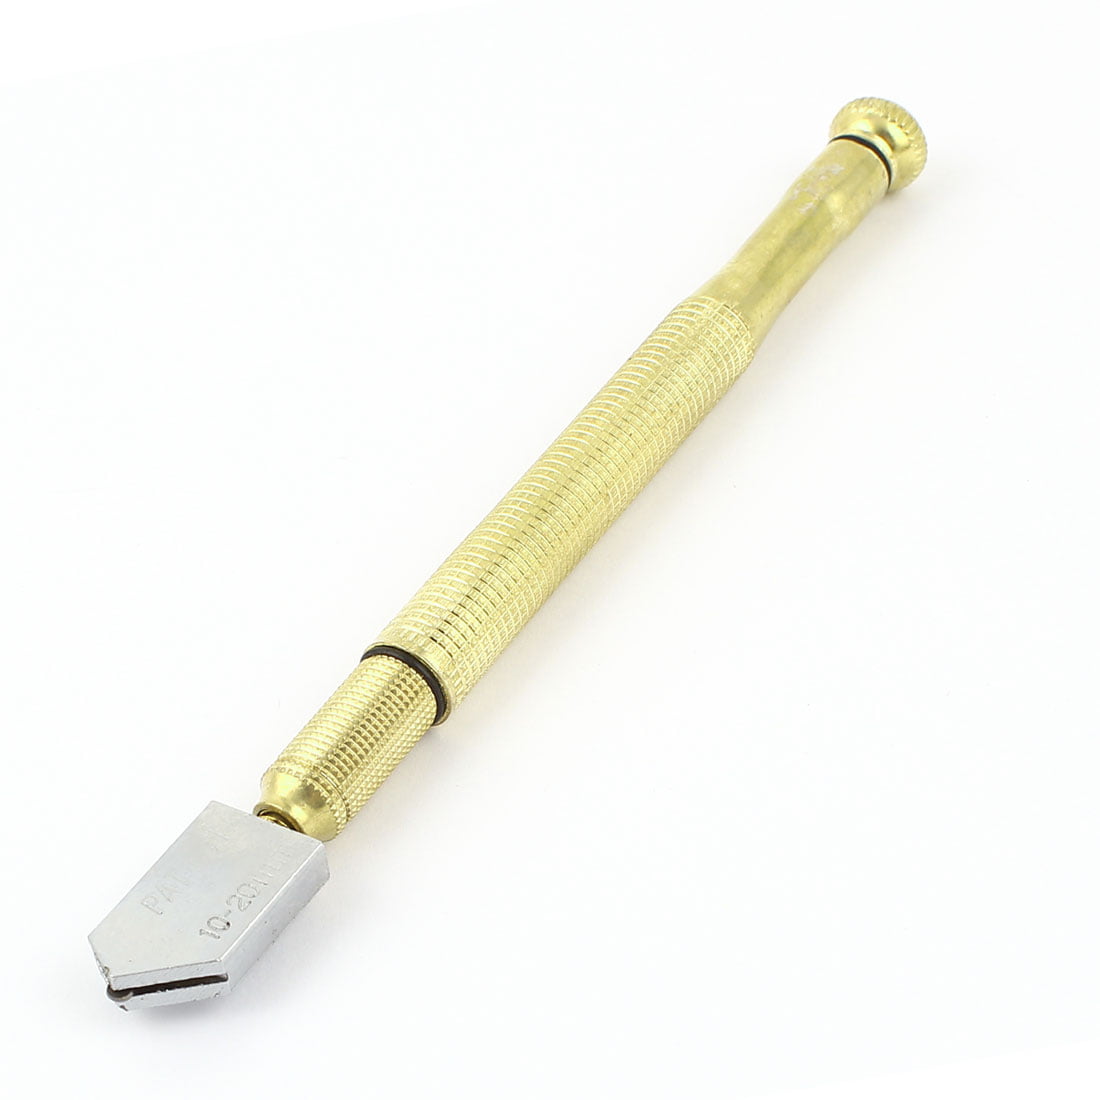 uxcell Glass Cutter 10mm-20mm, Pencil Style Oil Feed Carbide Tip Golden  Metal Handle for Glass Tiles Mirror Cutting